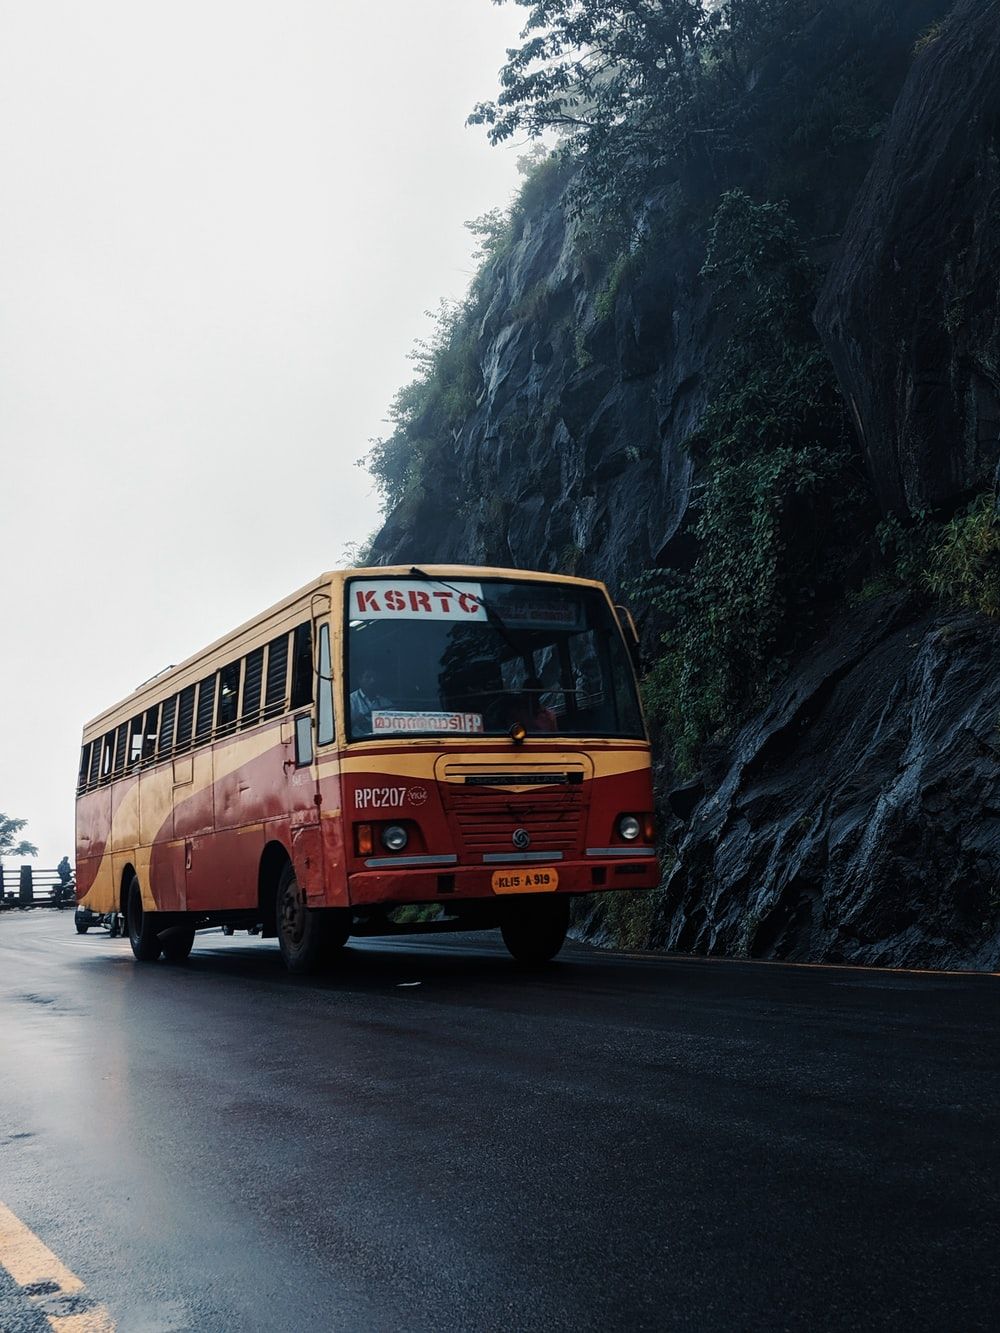 Ksrtc Picture. Download Free Image